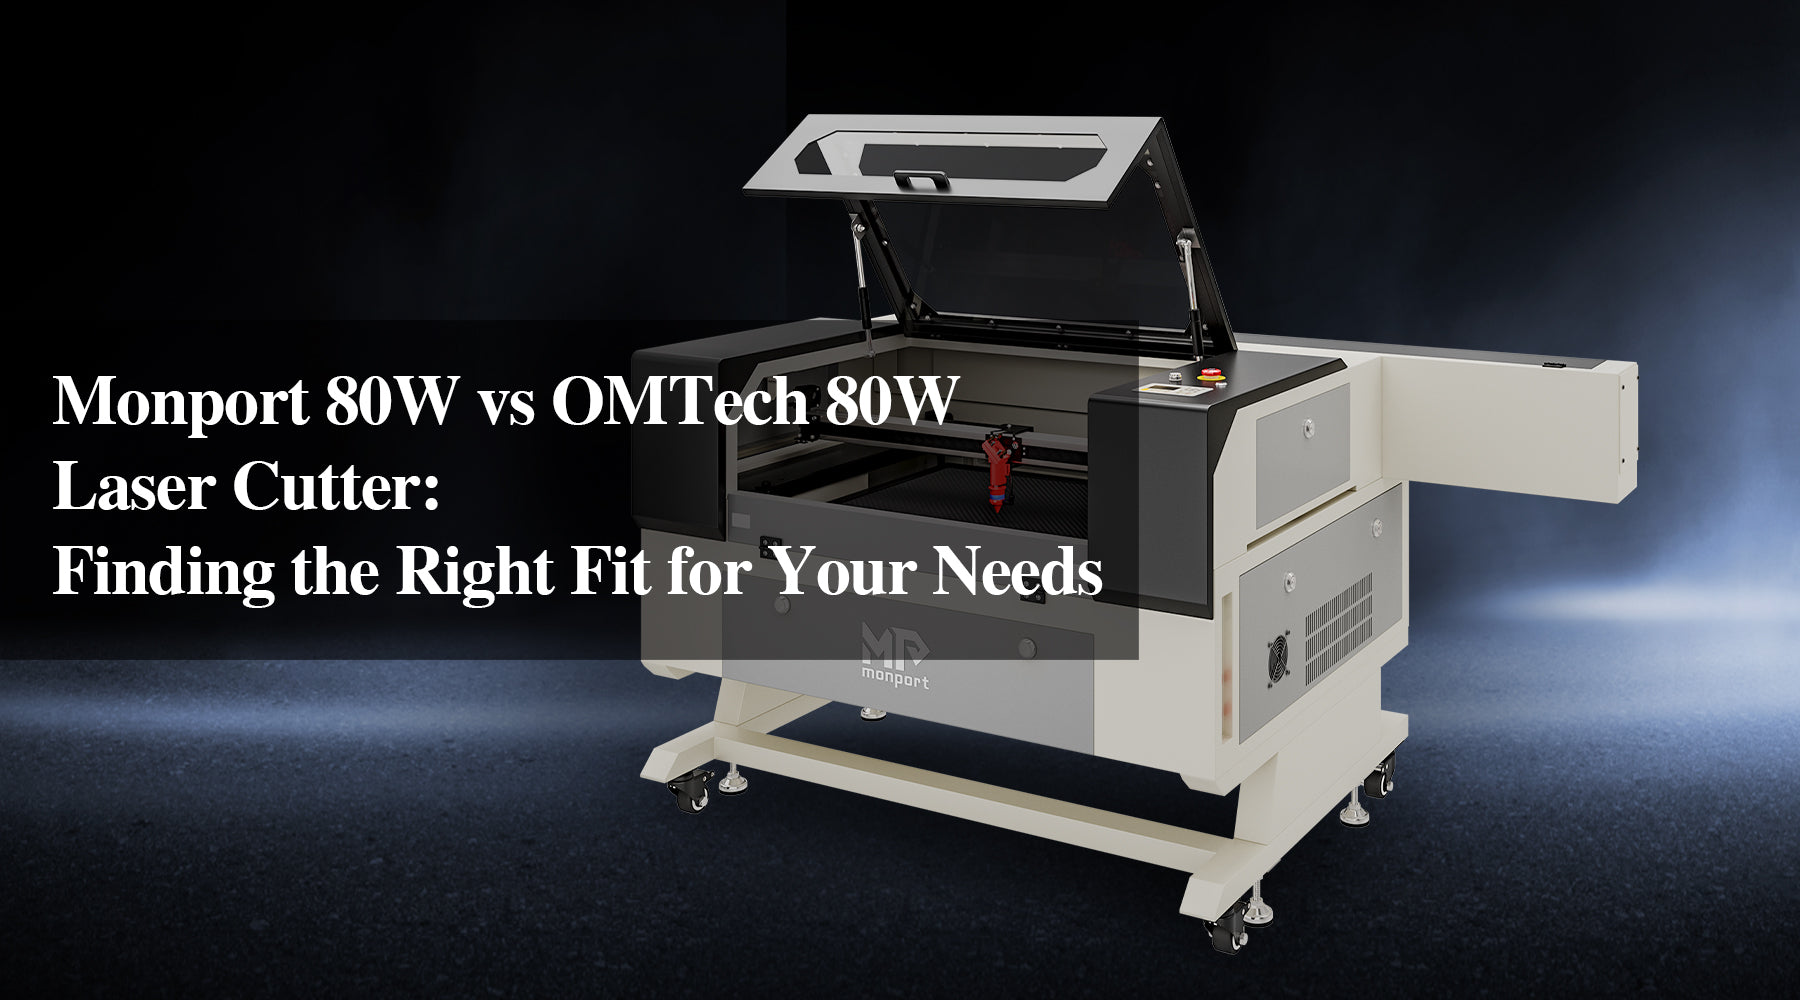 Monport 80W vs OMTech 80W Laser Cutter: Finding the Right Fit for Your Needs